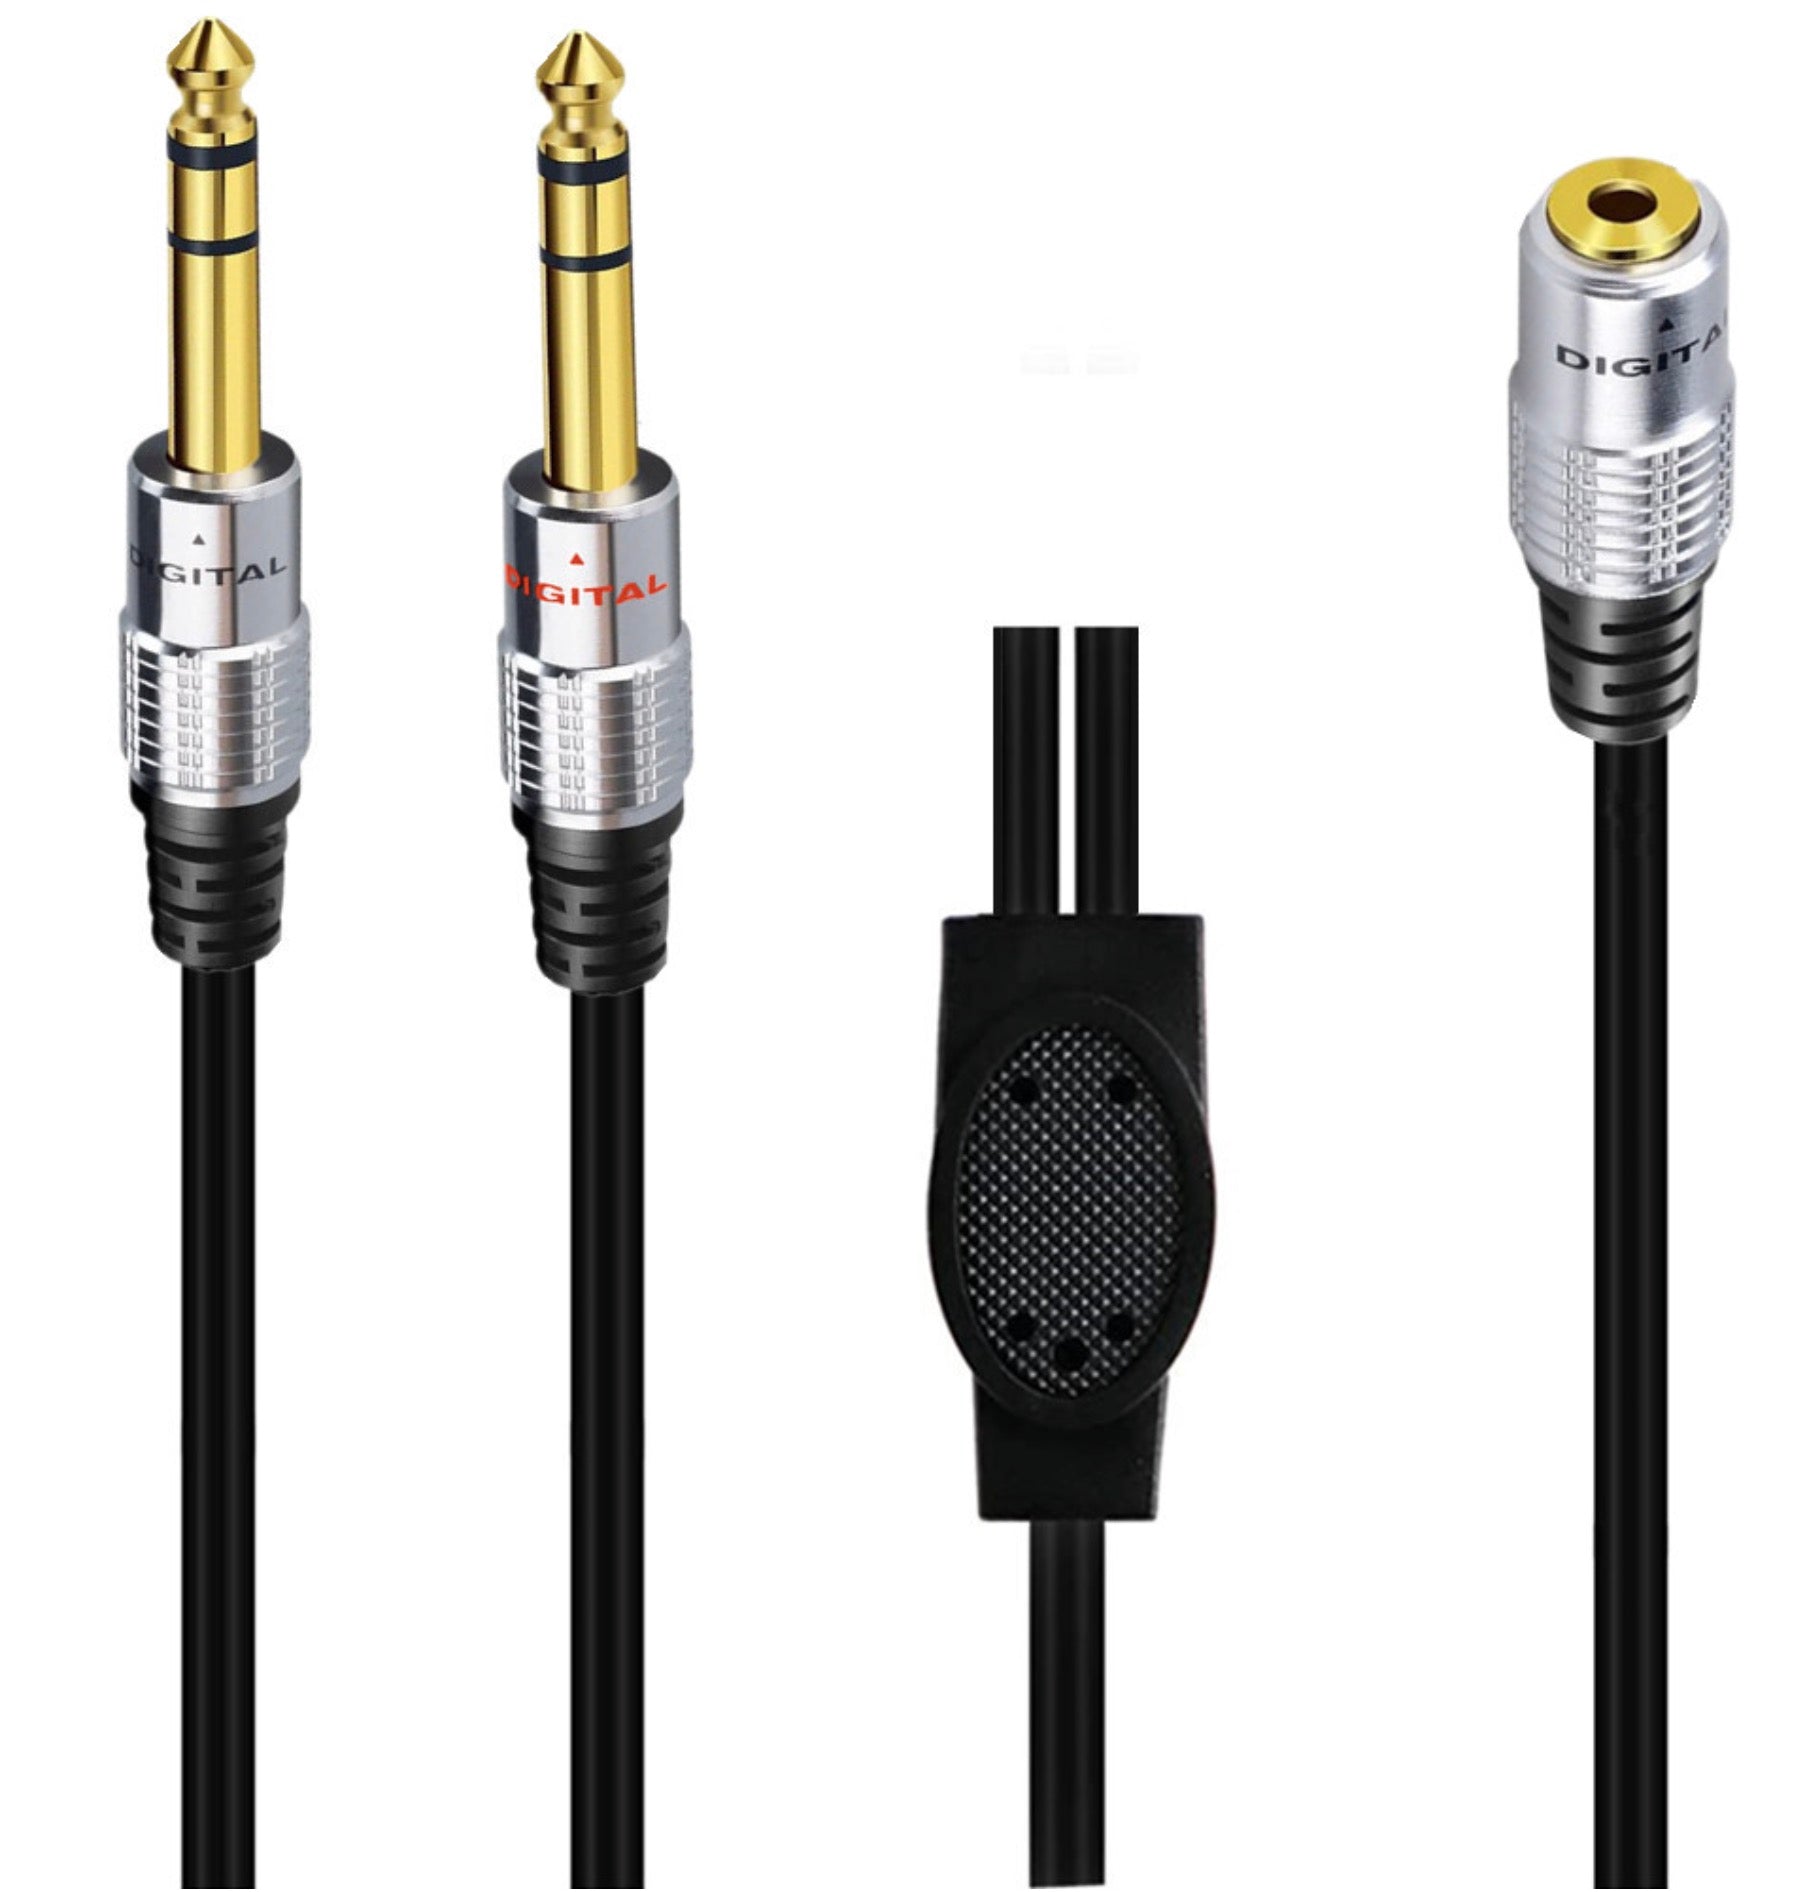 3.5mm 1/4" inch Female to Dual 6.35mm Male Stereo Headphone Guitar Extension Cable 0.5m